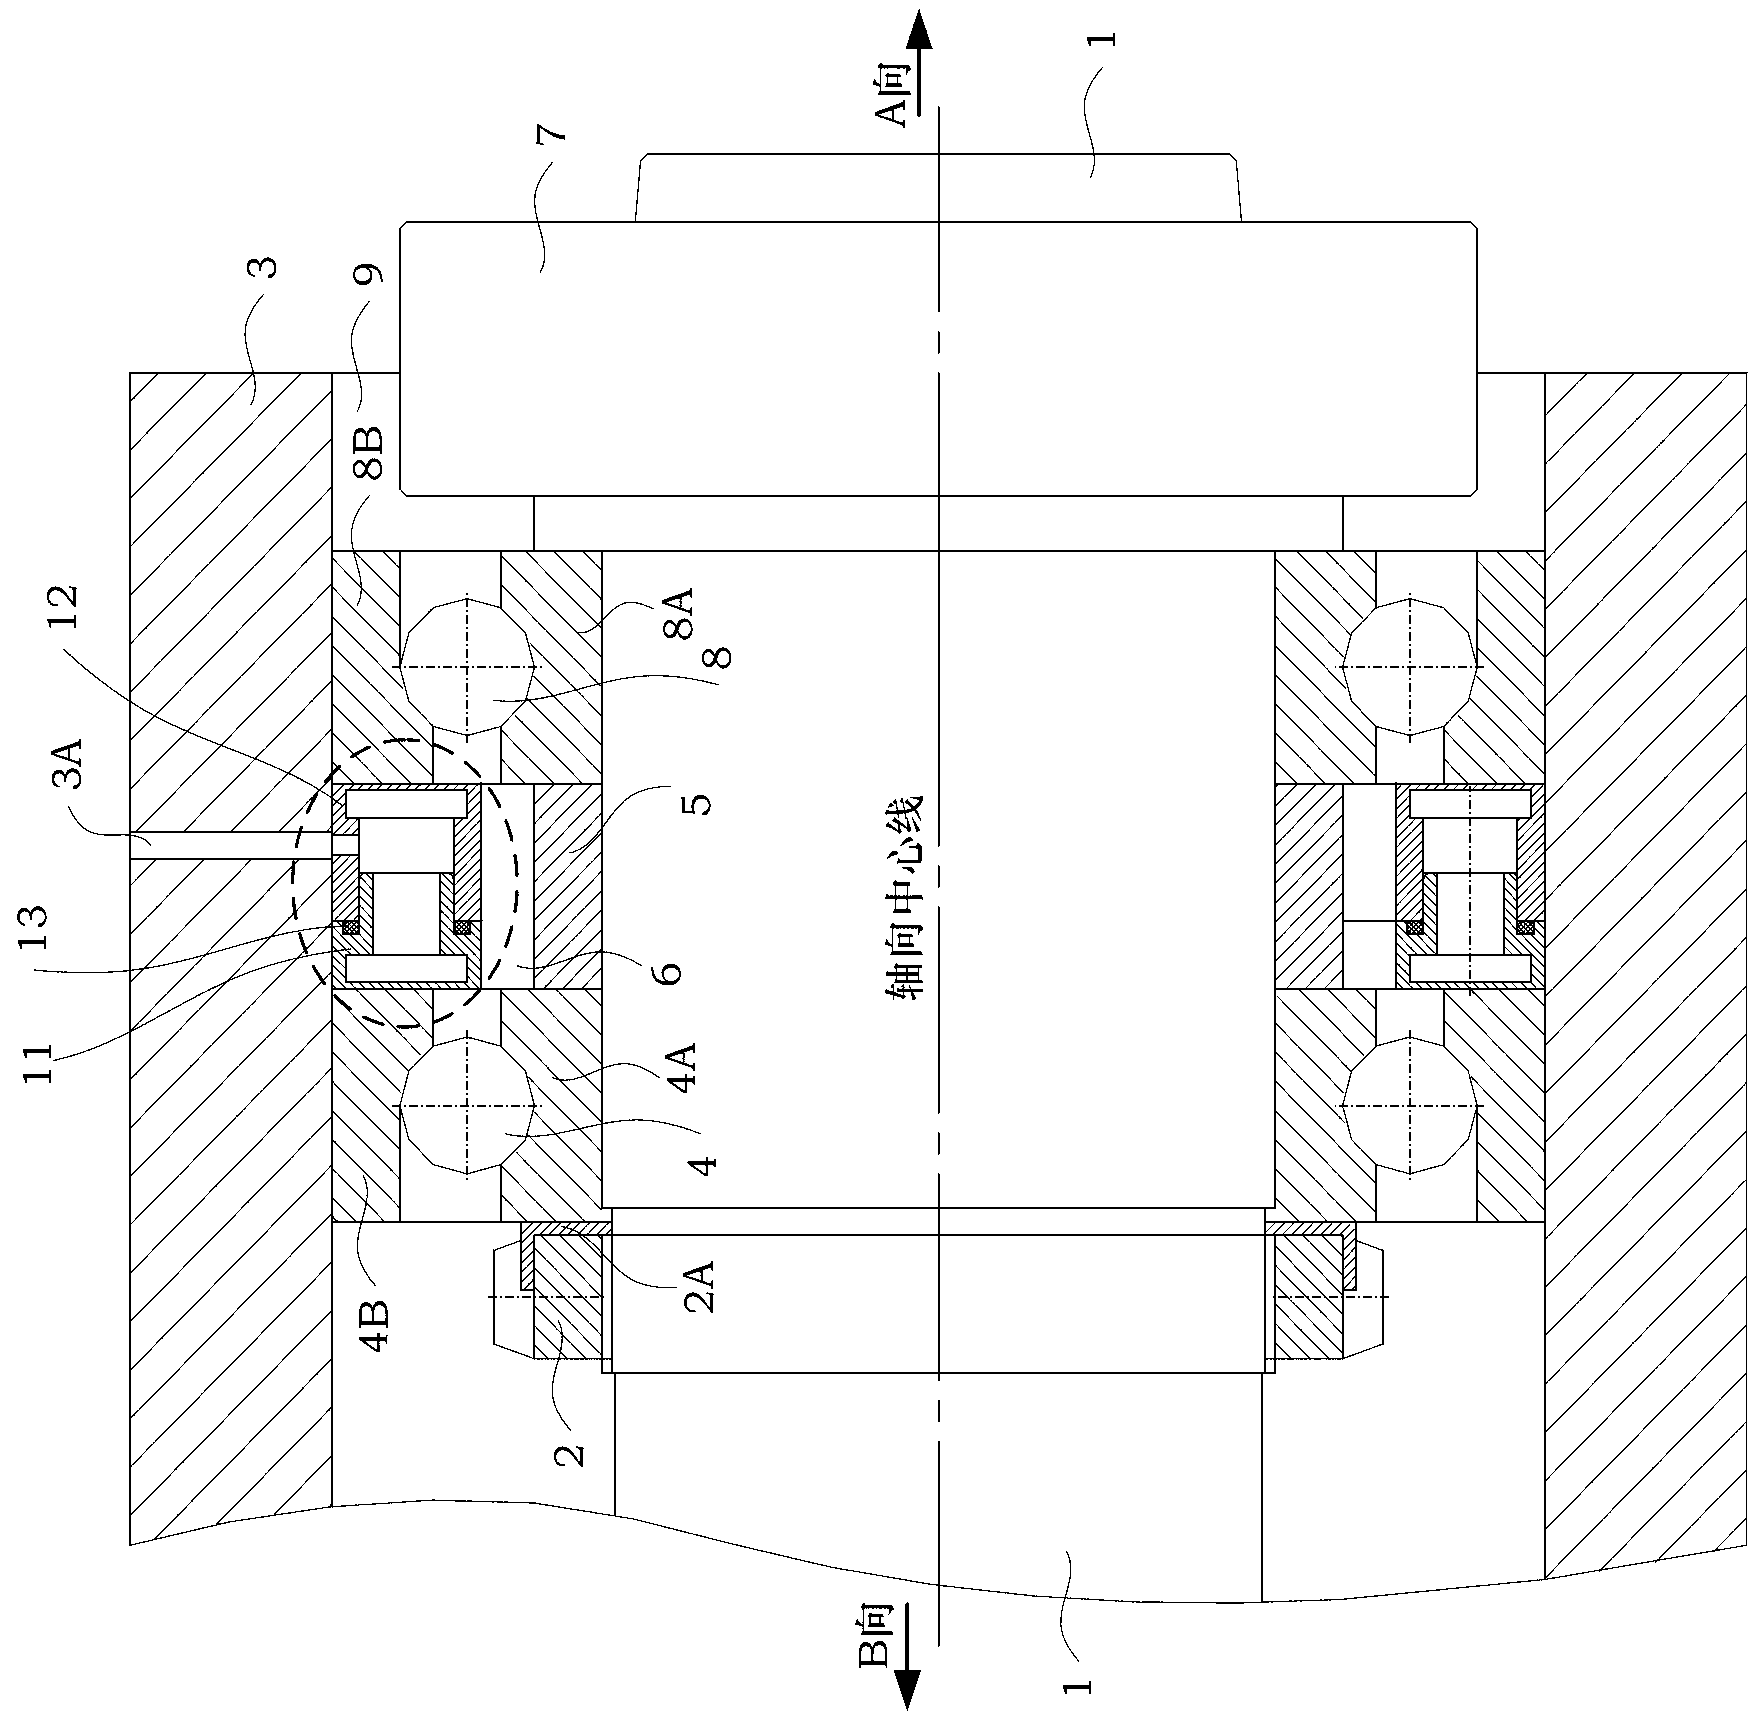 Device capable of improving axial rigidity of main shaft of precision machine tool with adjustable bearing pre-tightening force